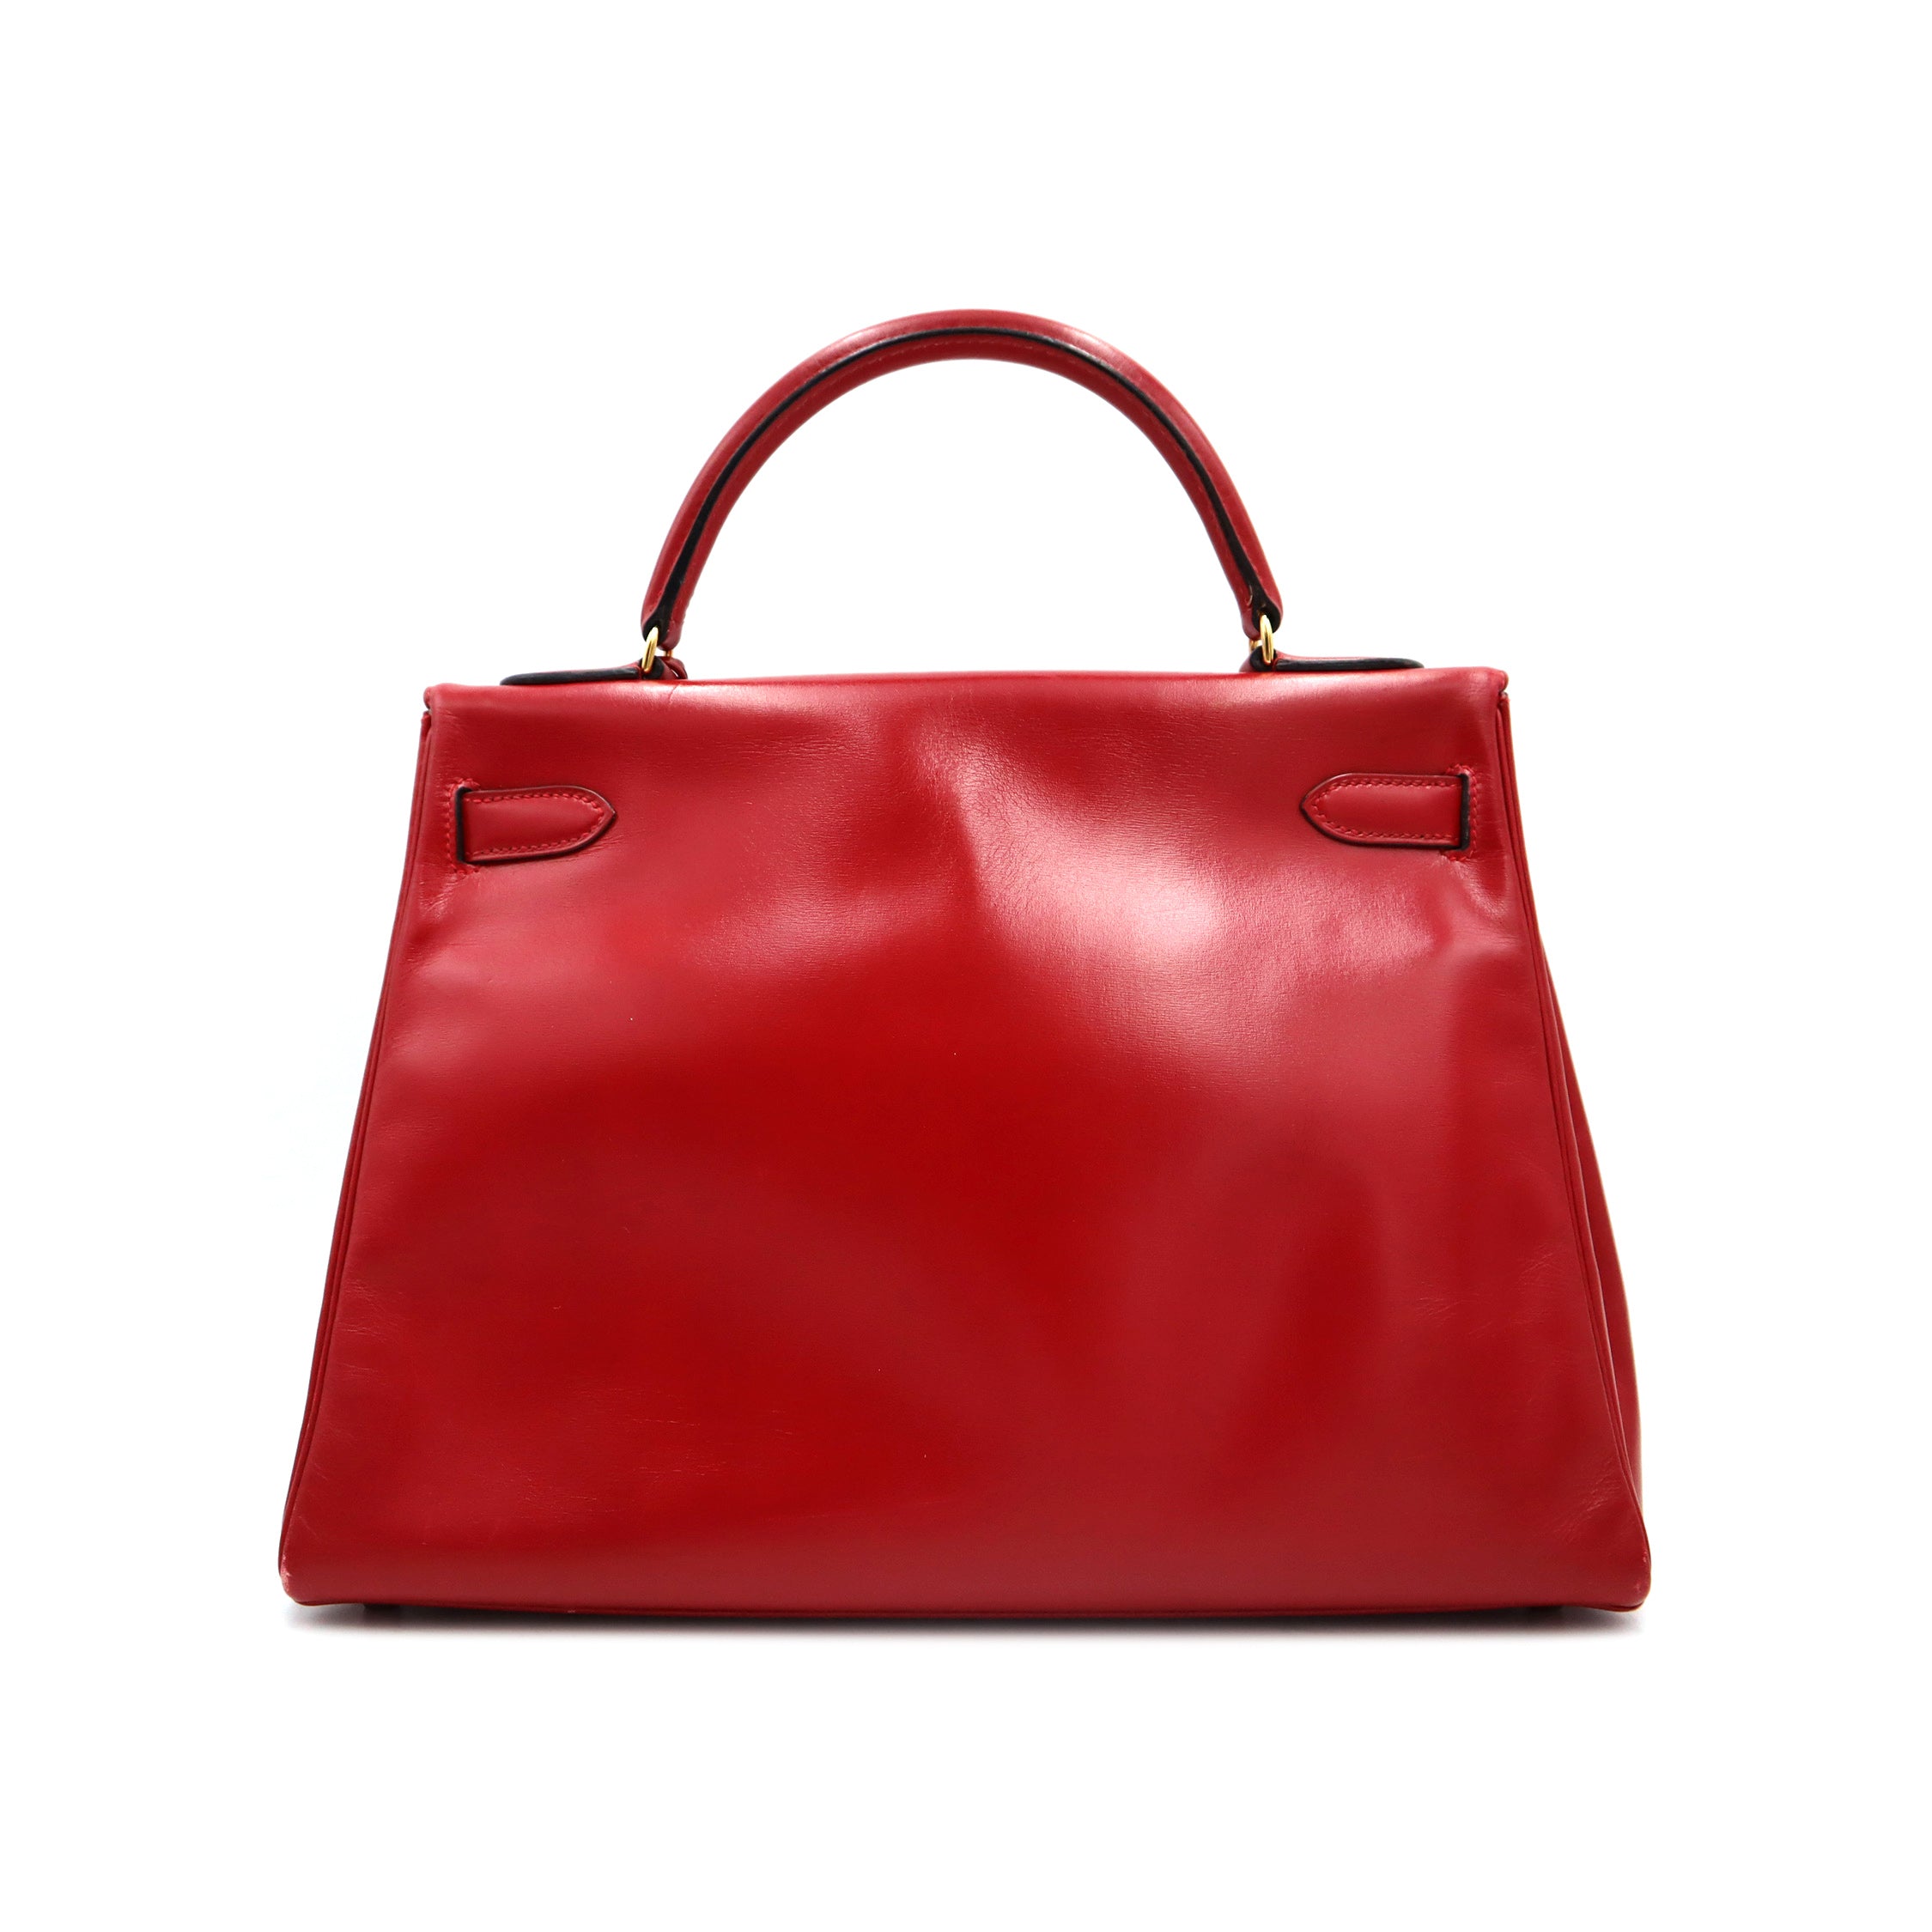 Pre-Owned Hermes Kelly 32 Retourne Handbag Red Box Calf with Gold Hardware